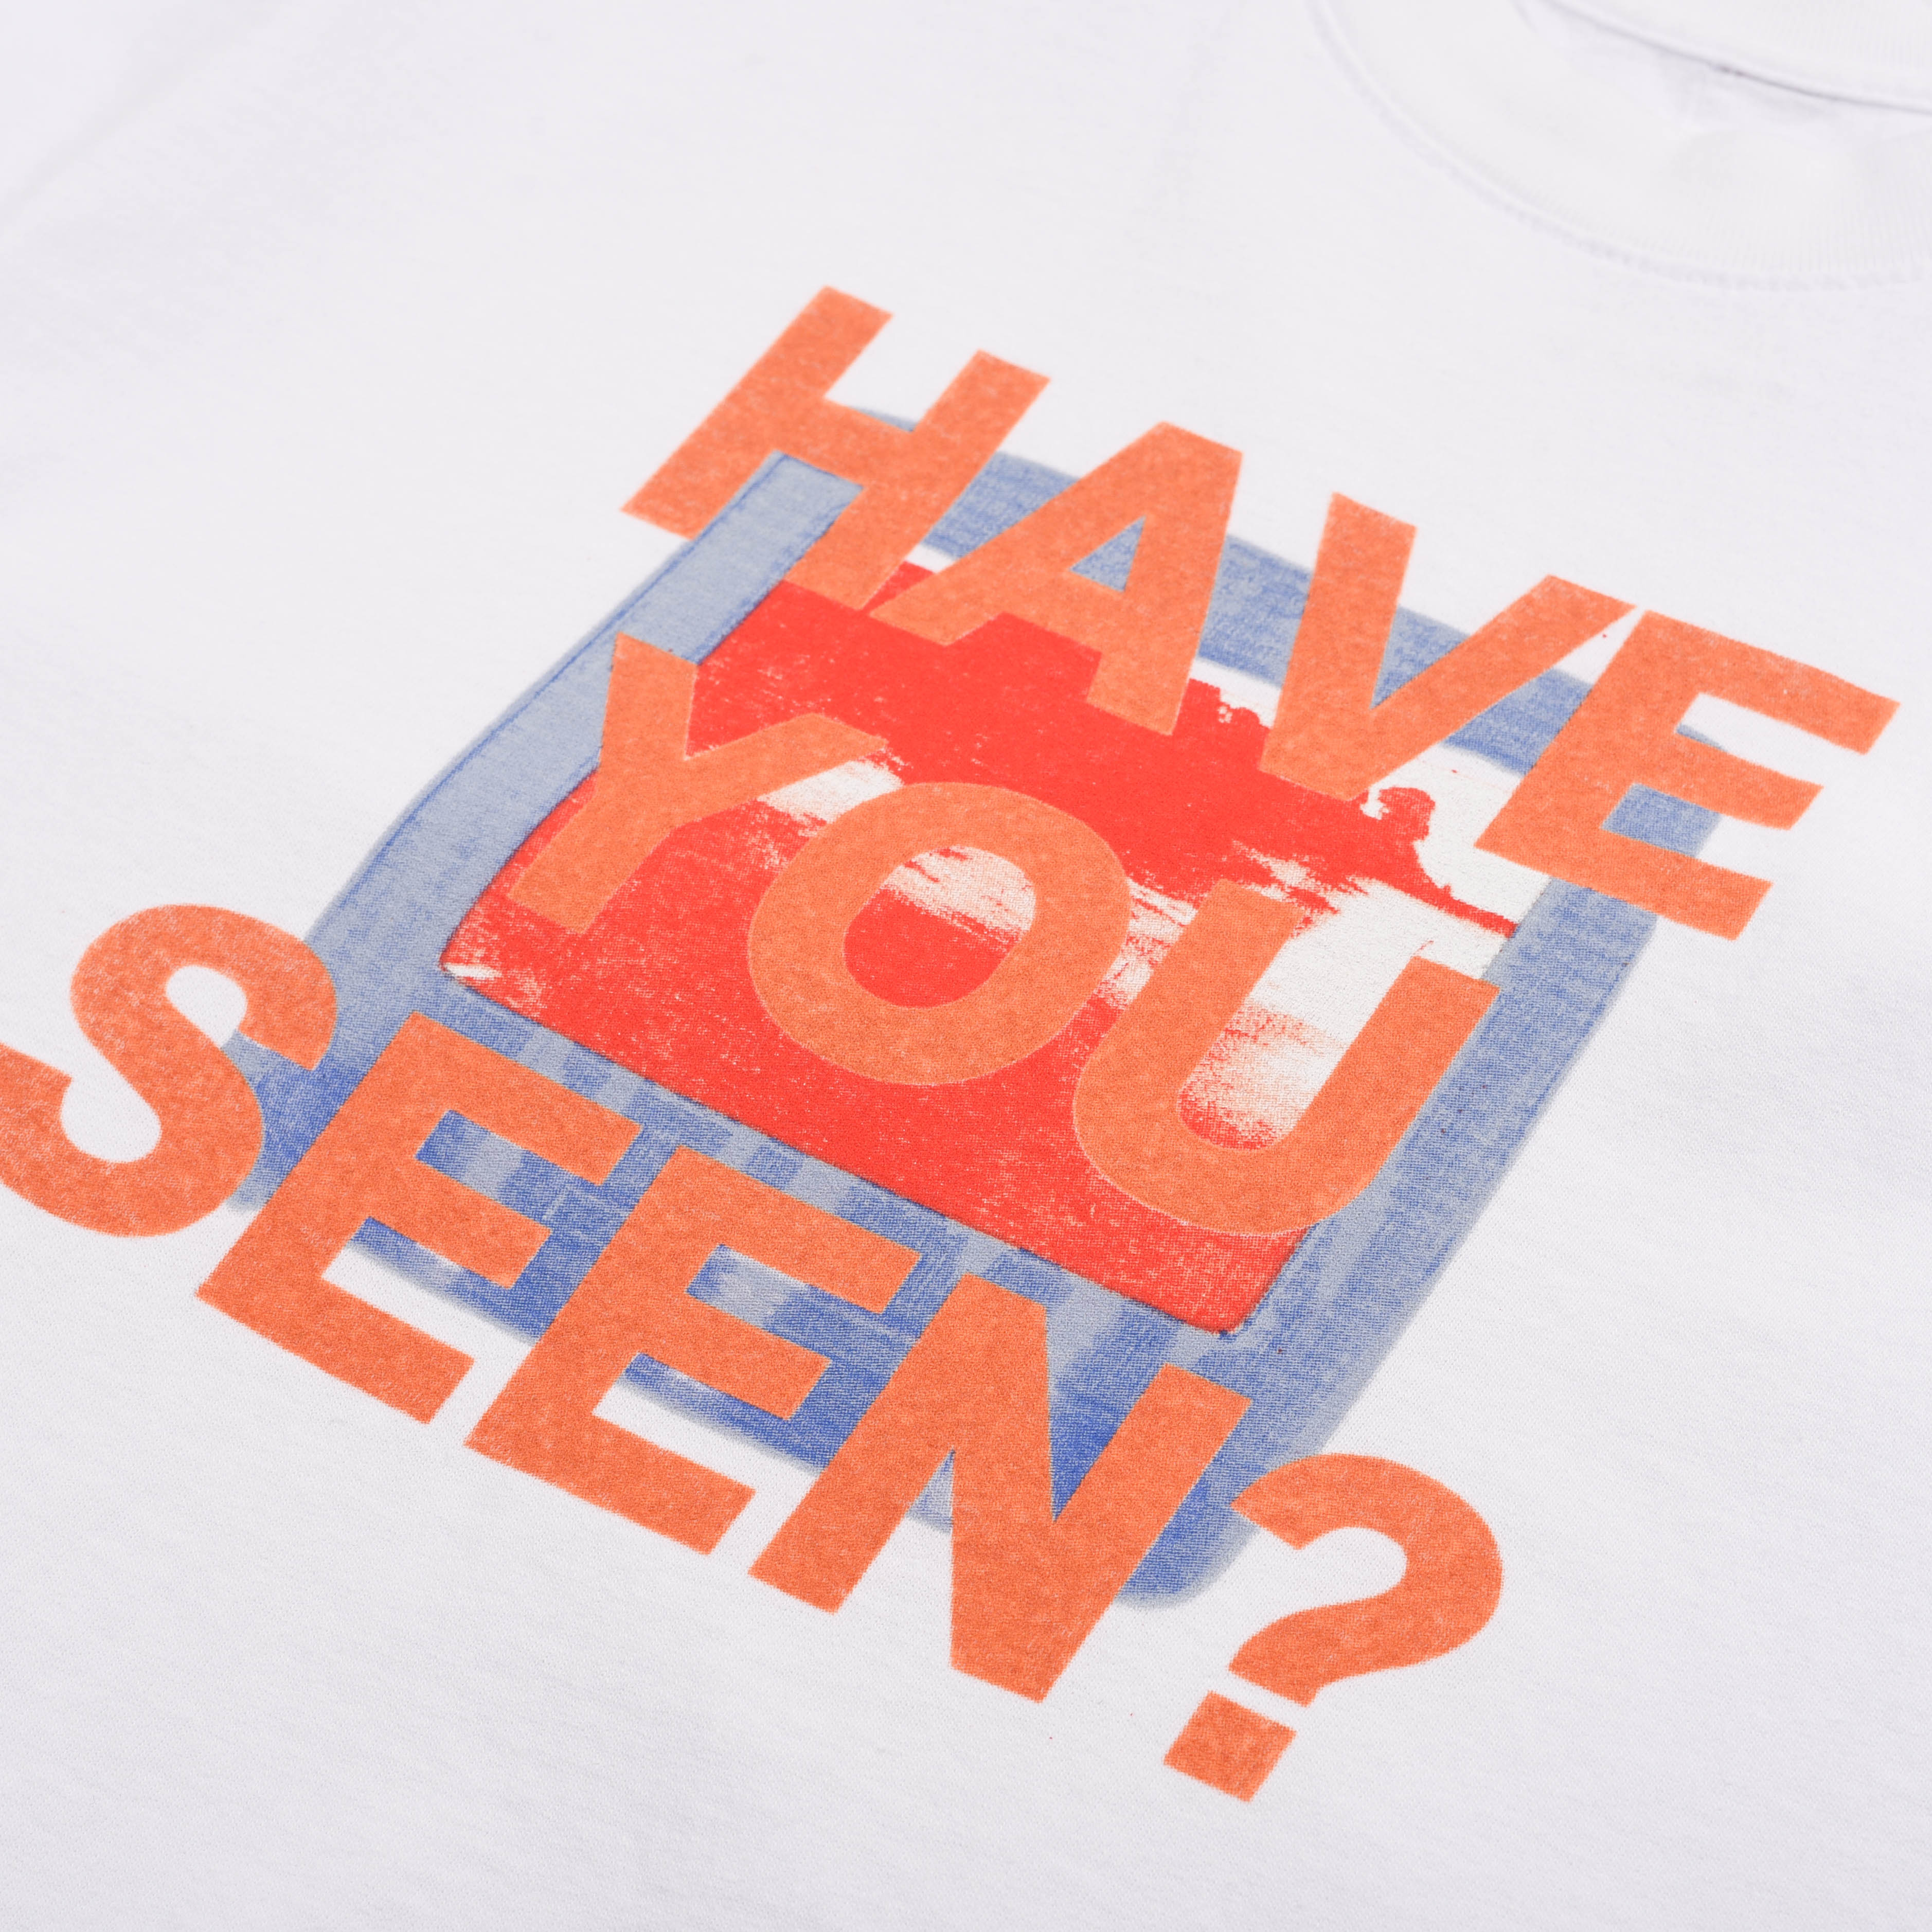 HAVE YOU SEEN T-SHIRT - WHITE